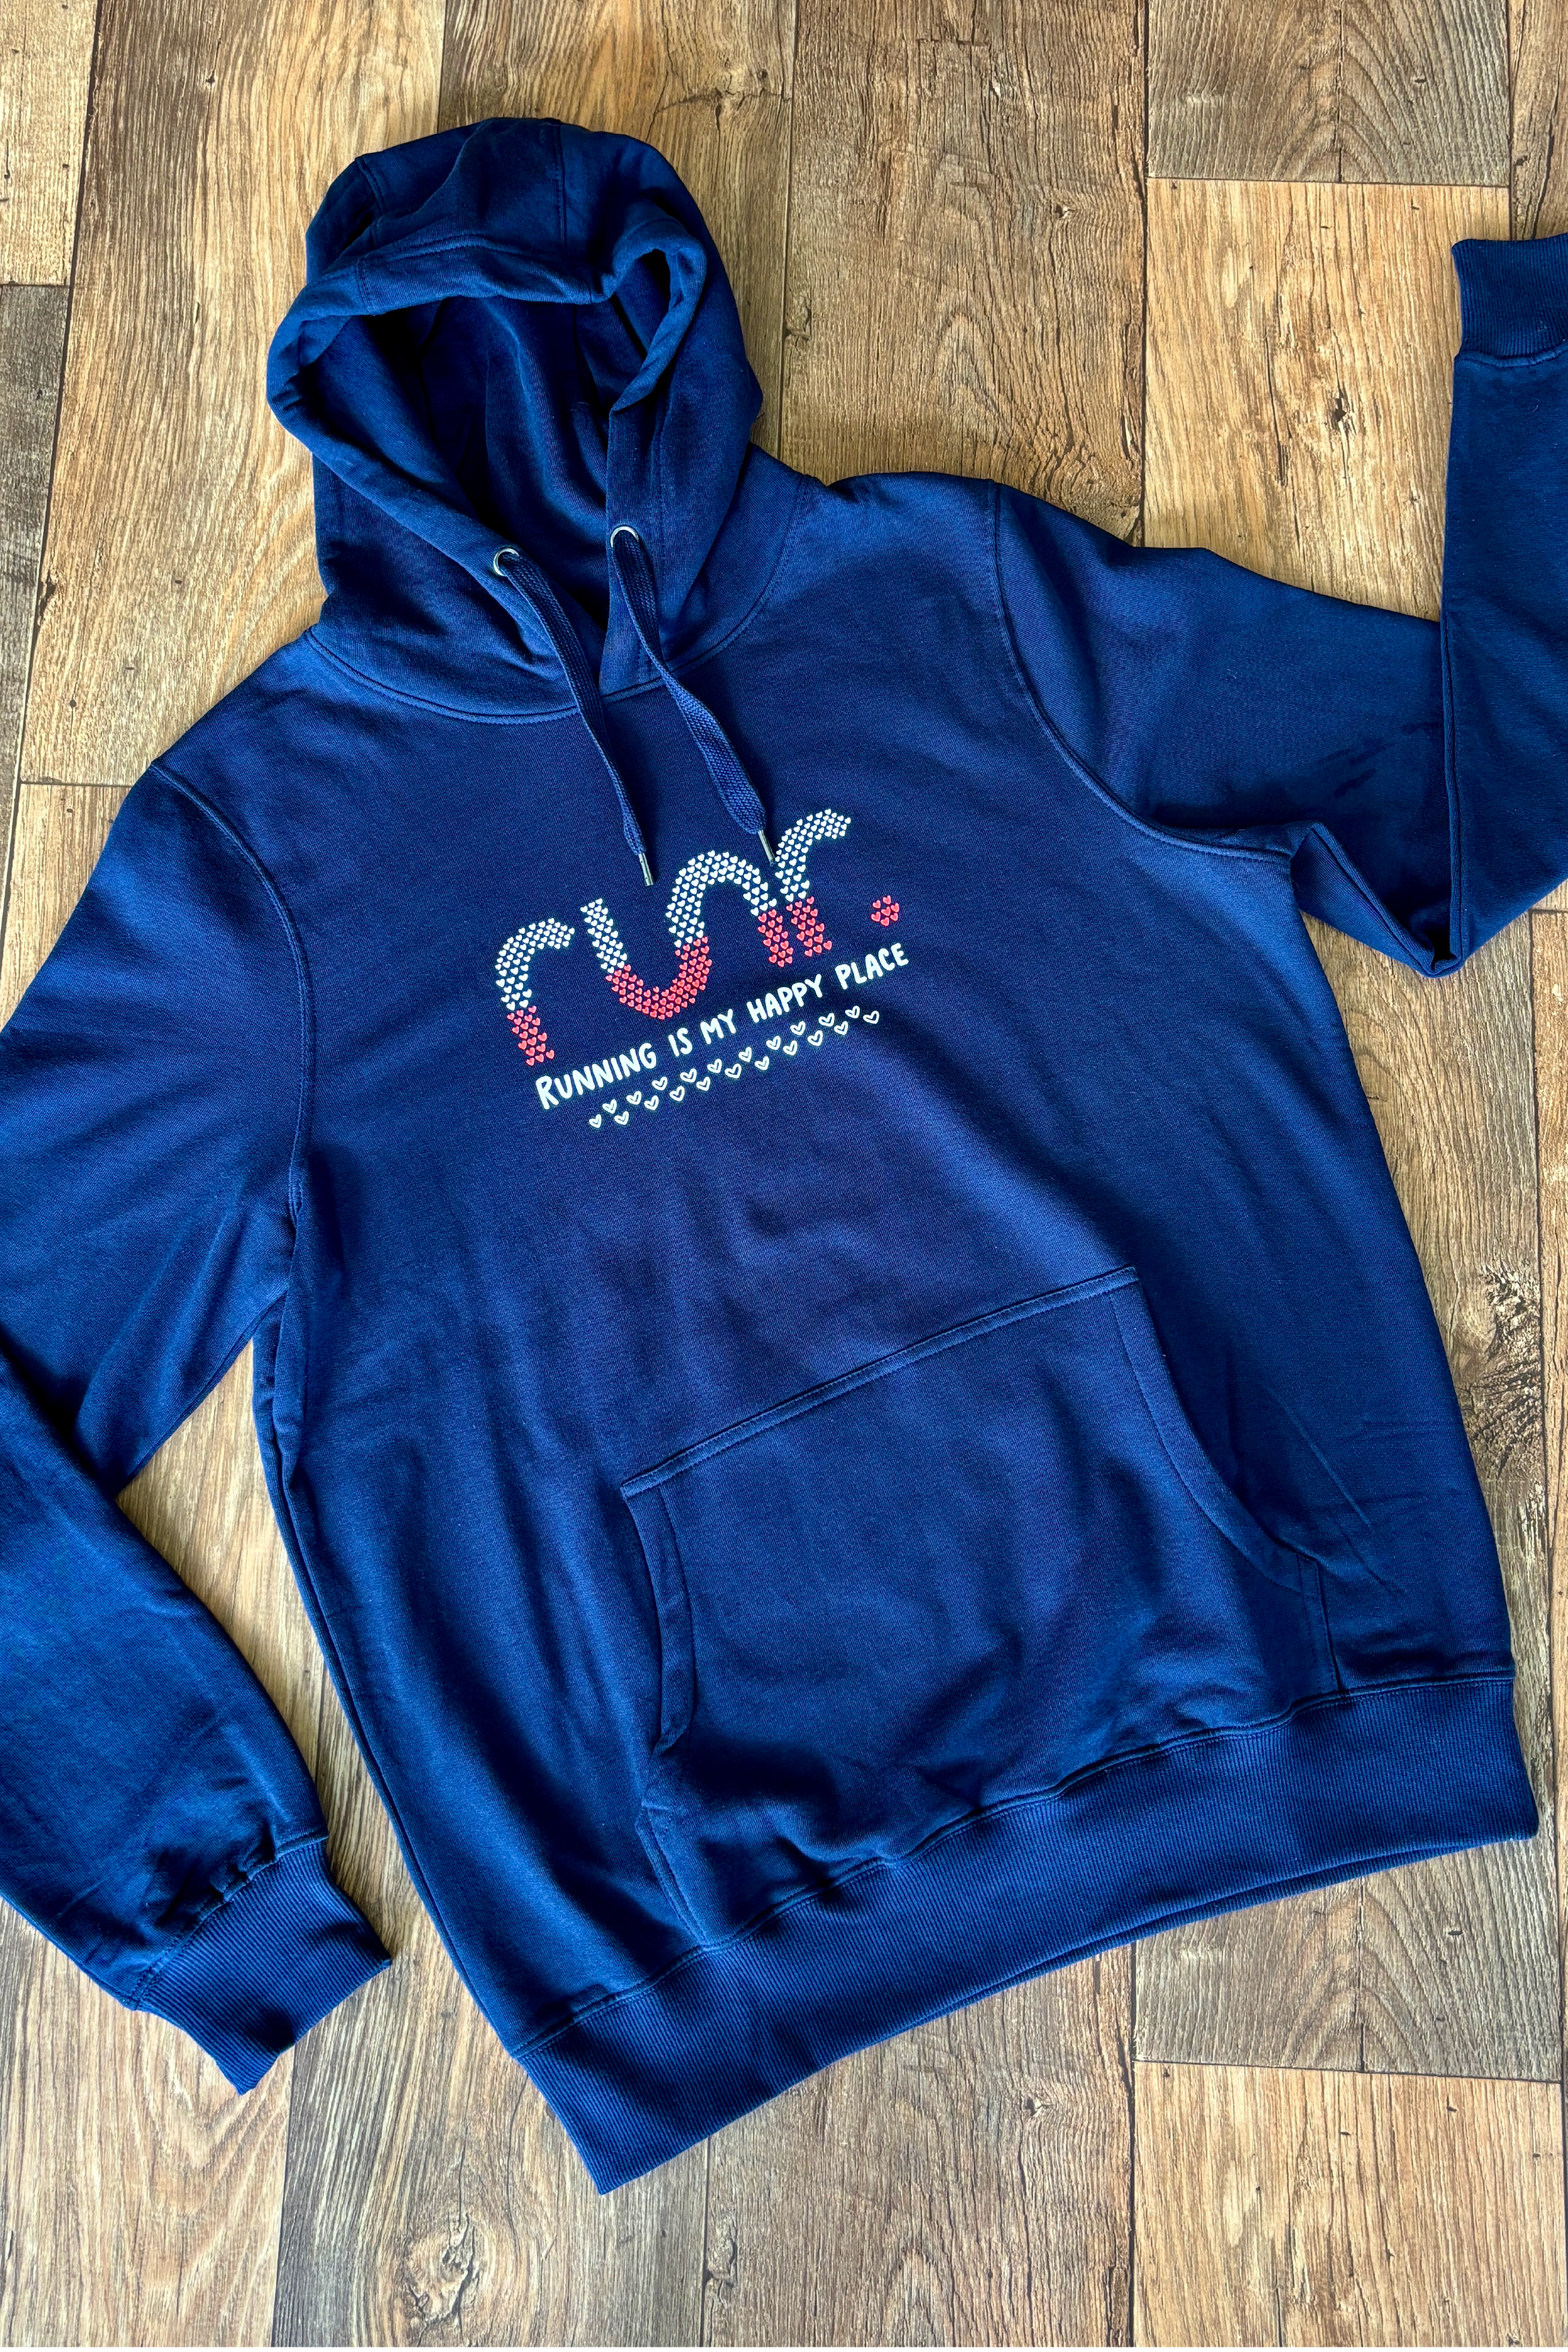 'Running Is My Happy Place' Hoodie